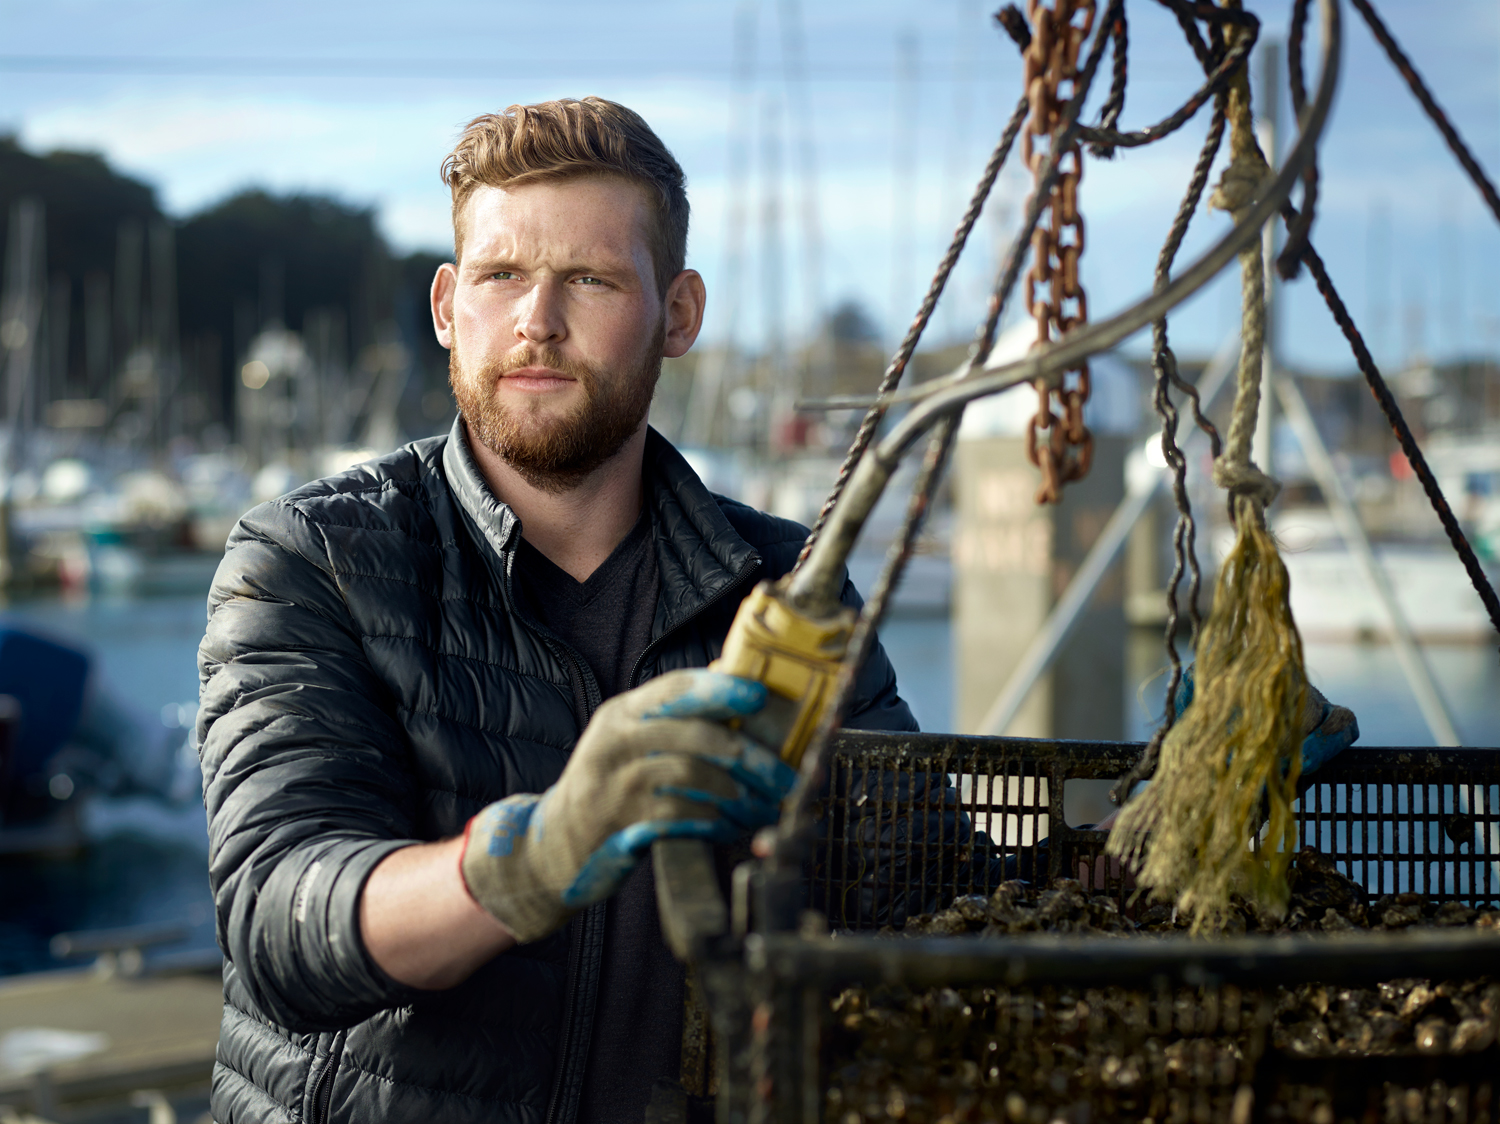 NorcalTrip-632-1500px-Fisherman-Oyster-Farmer-Outdoors-Portrait-SeanMoore.jpg